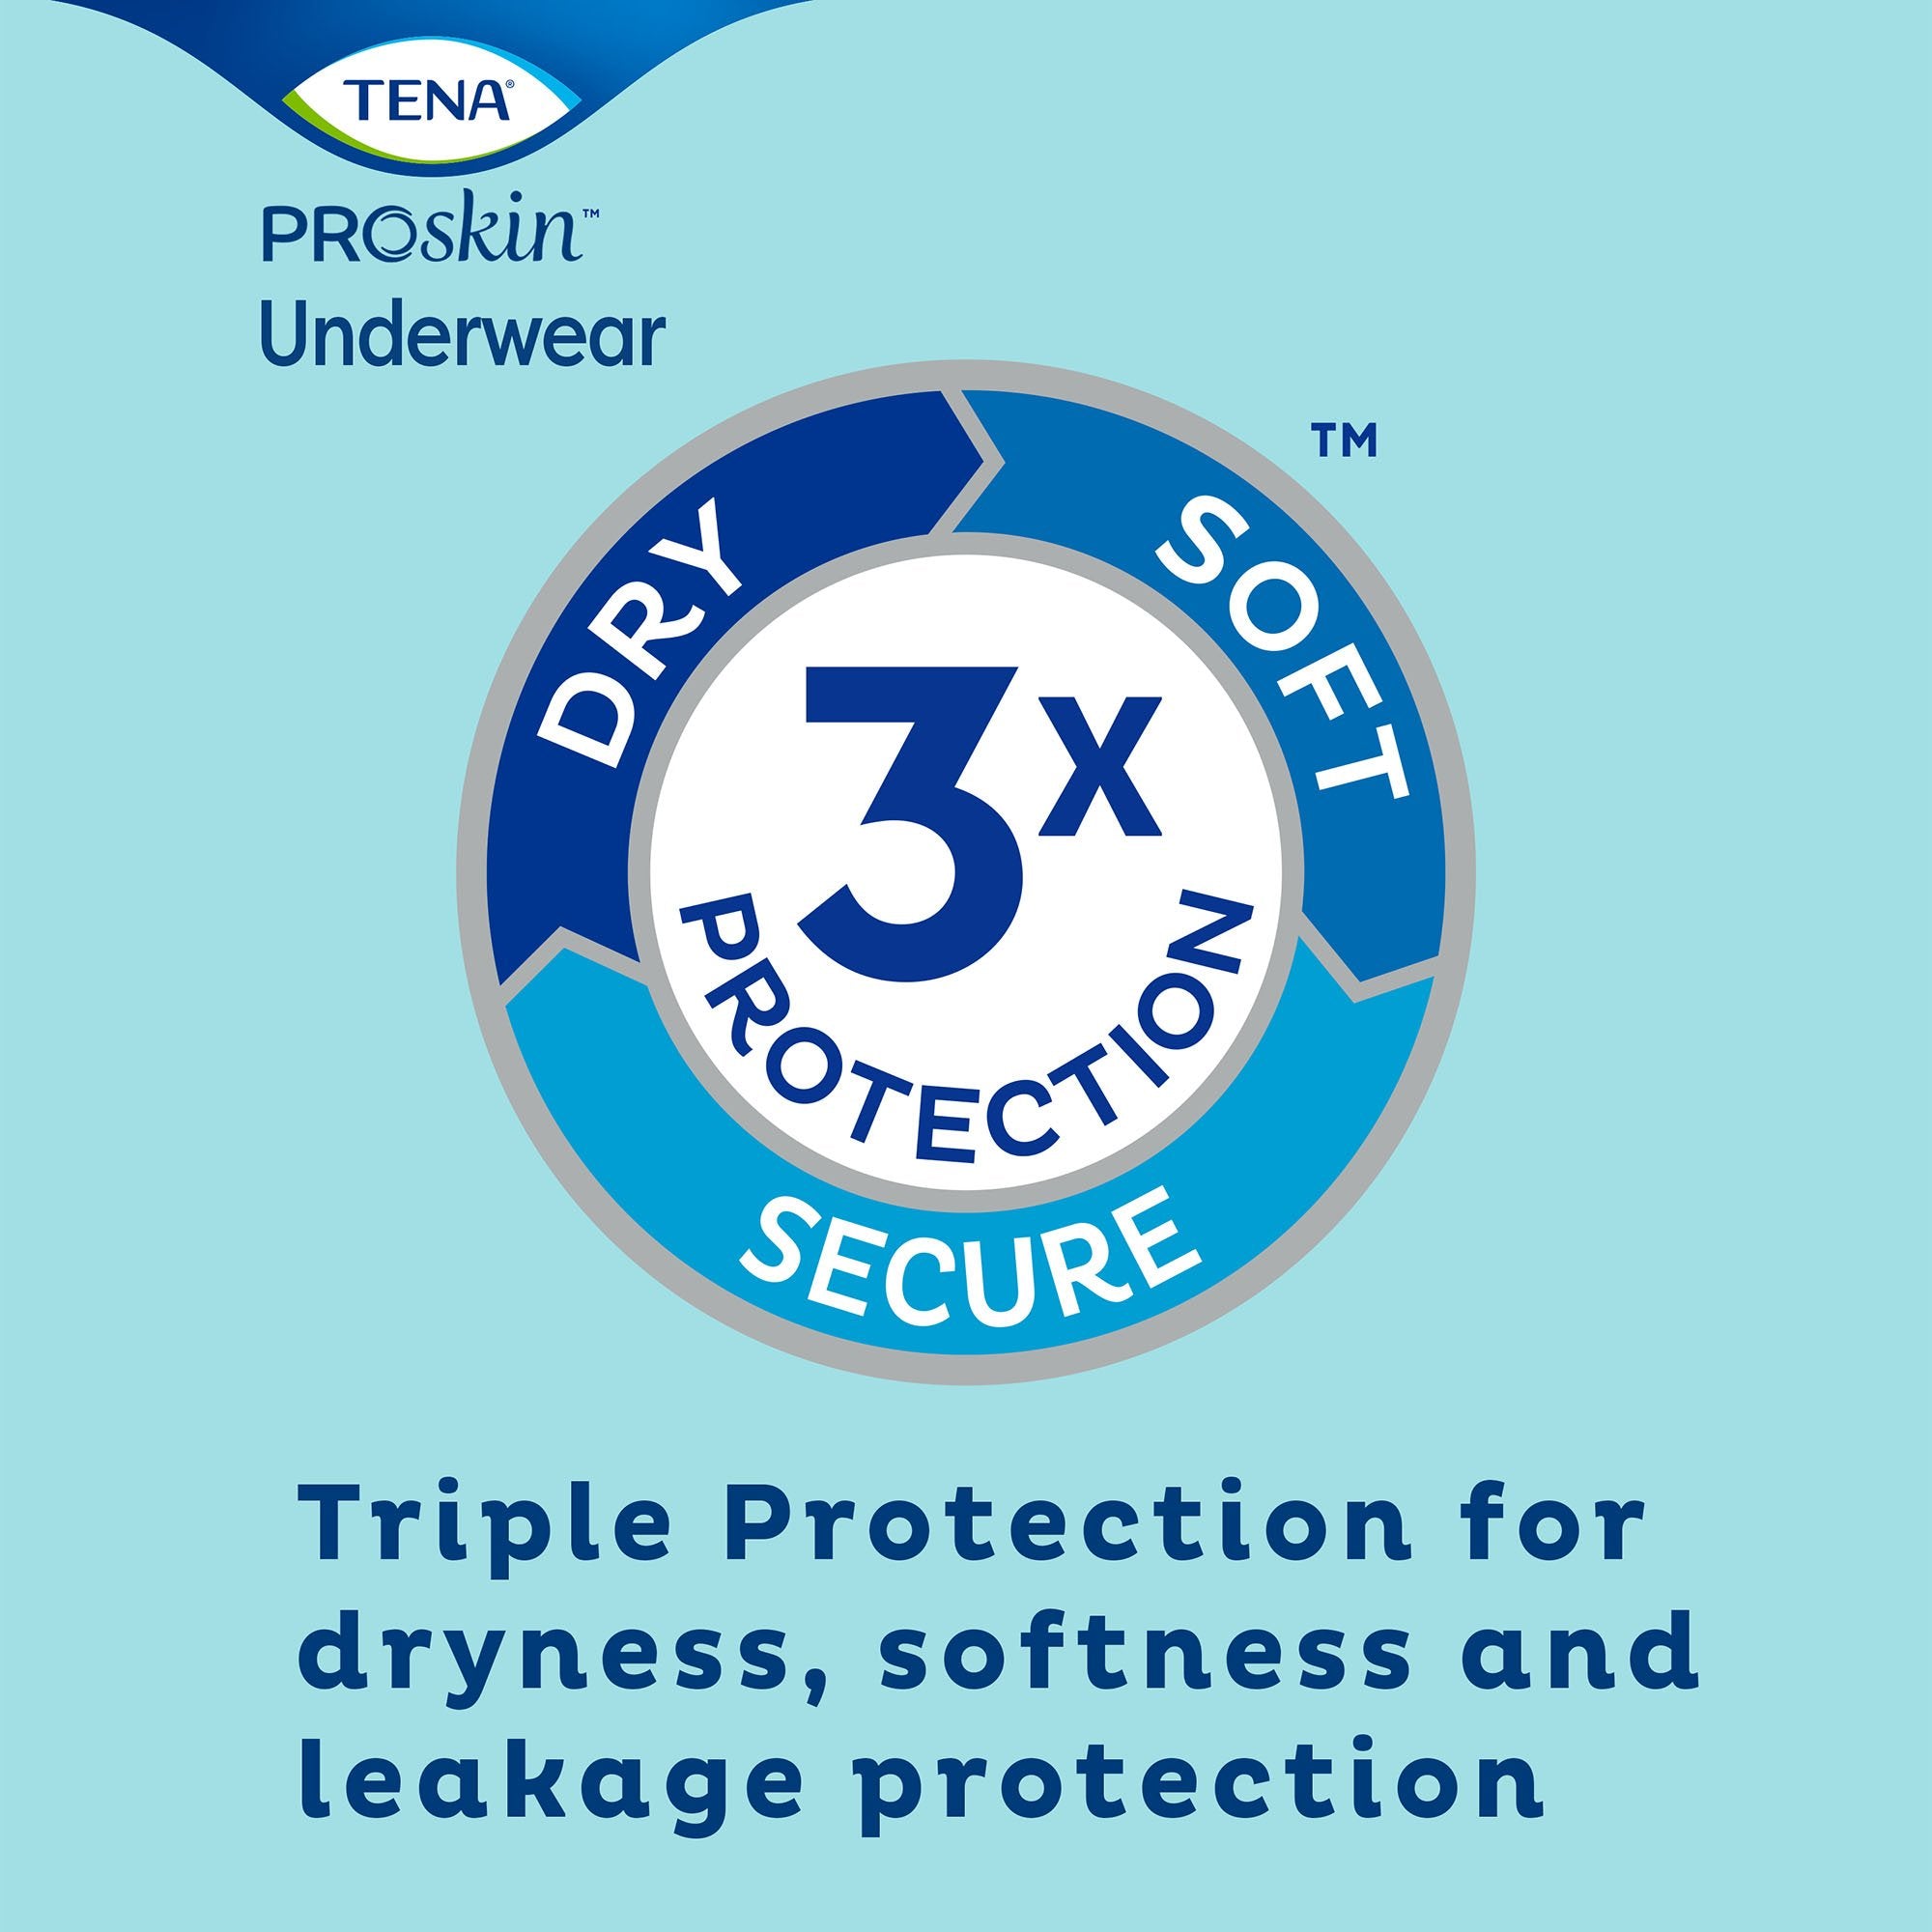 Unisex Adult Absorbent Underwear TENA ProSkin Extra Protective Pull On with Tear Away Seams 2X-Large Disposable Moderate Absorbency